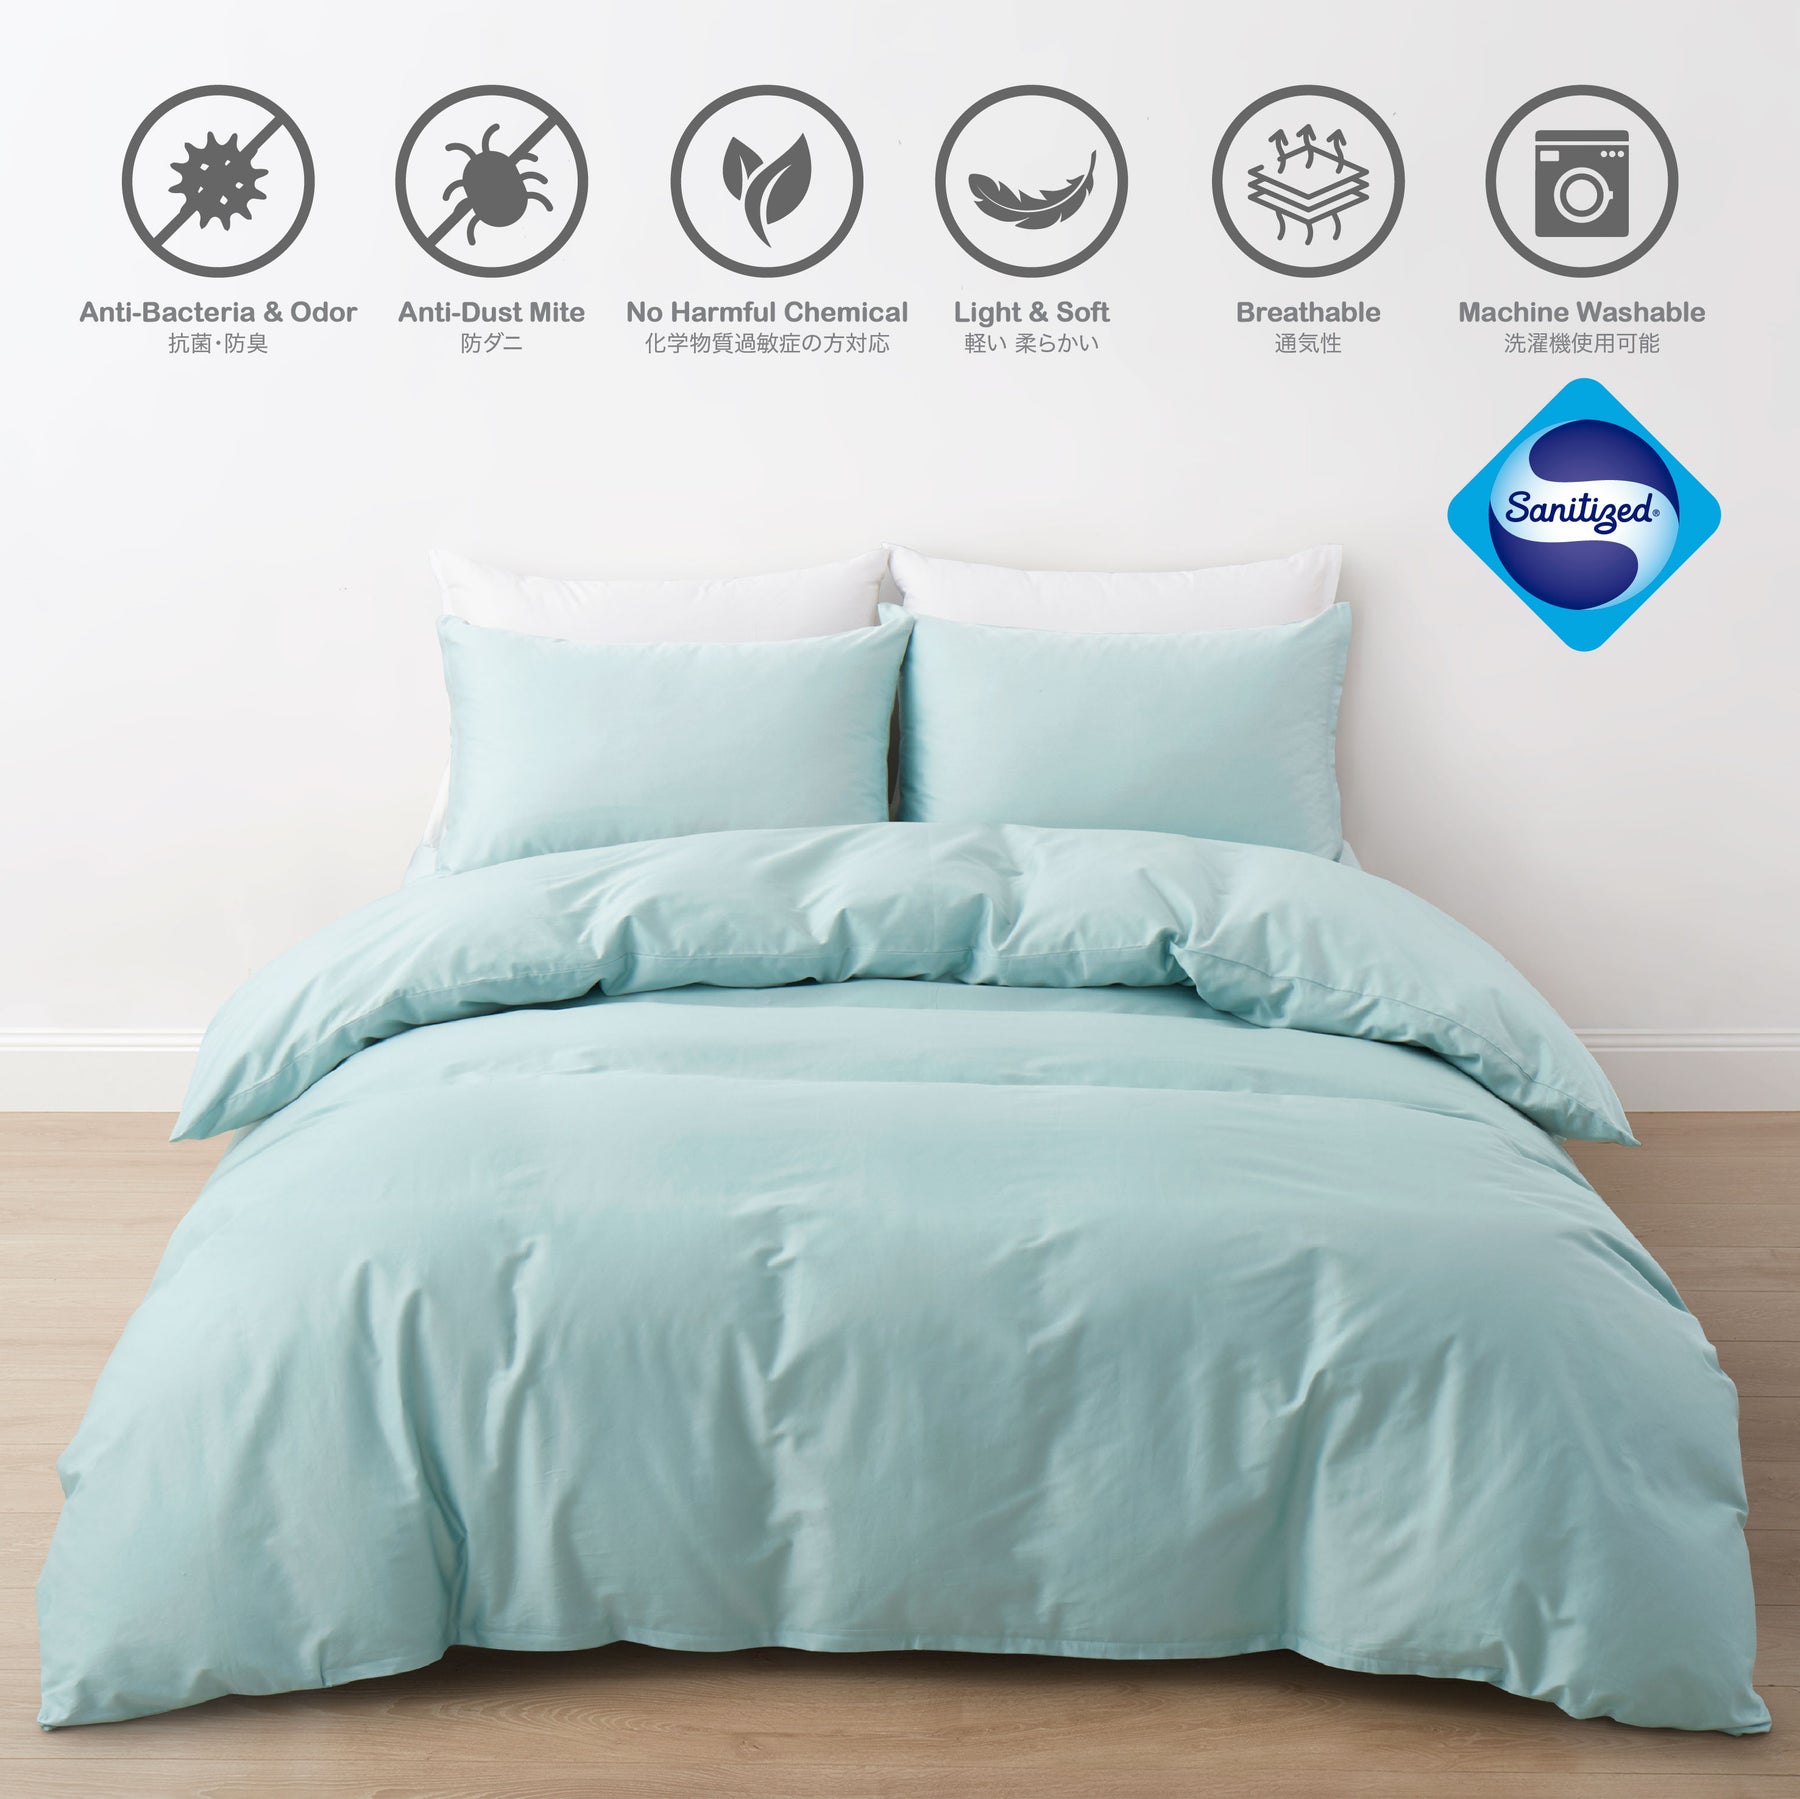 Anti-Dust Mite and Allergen Proof Fitted Bed Sheet Nanocotton® - nanoSPACE  Blue